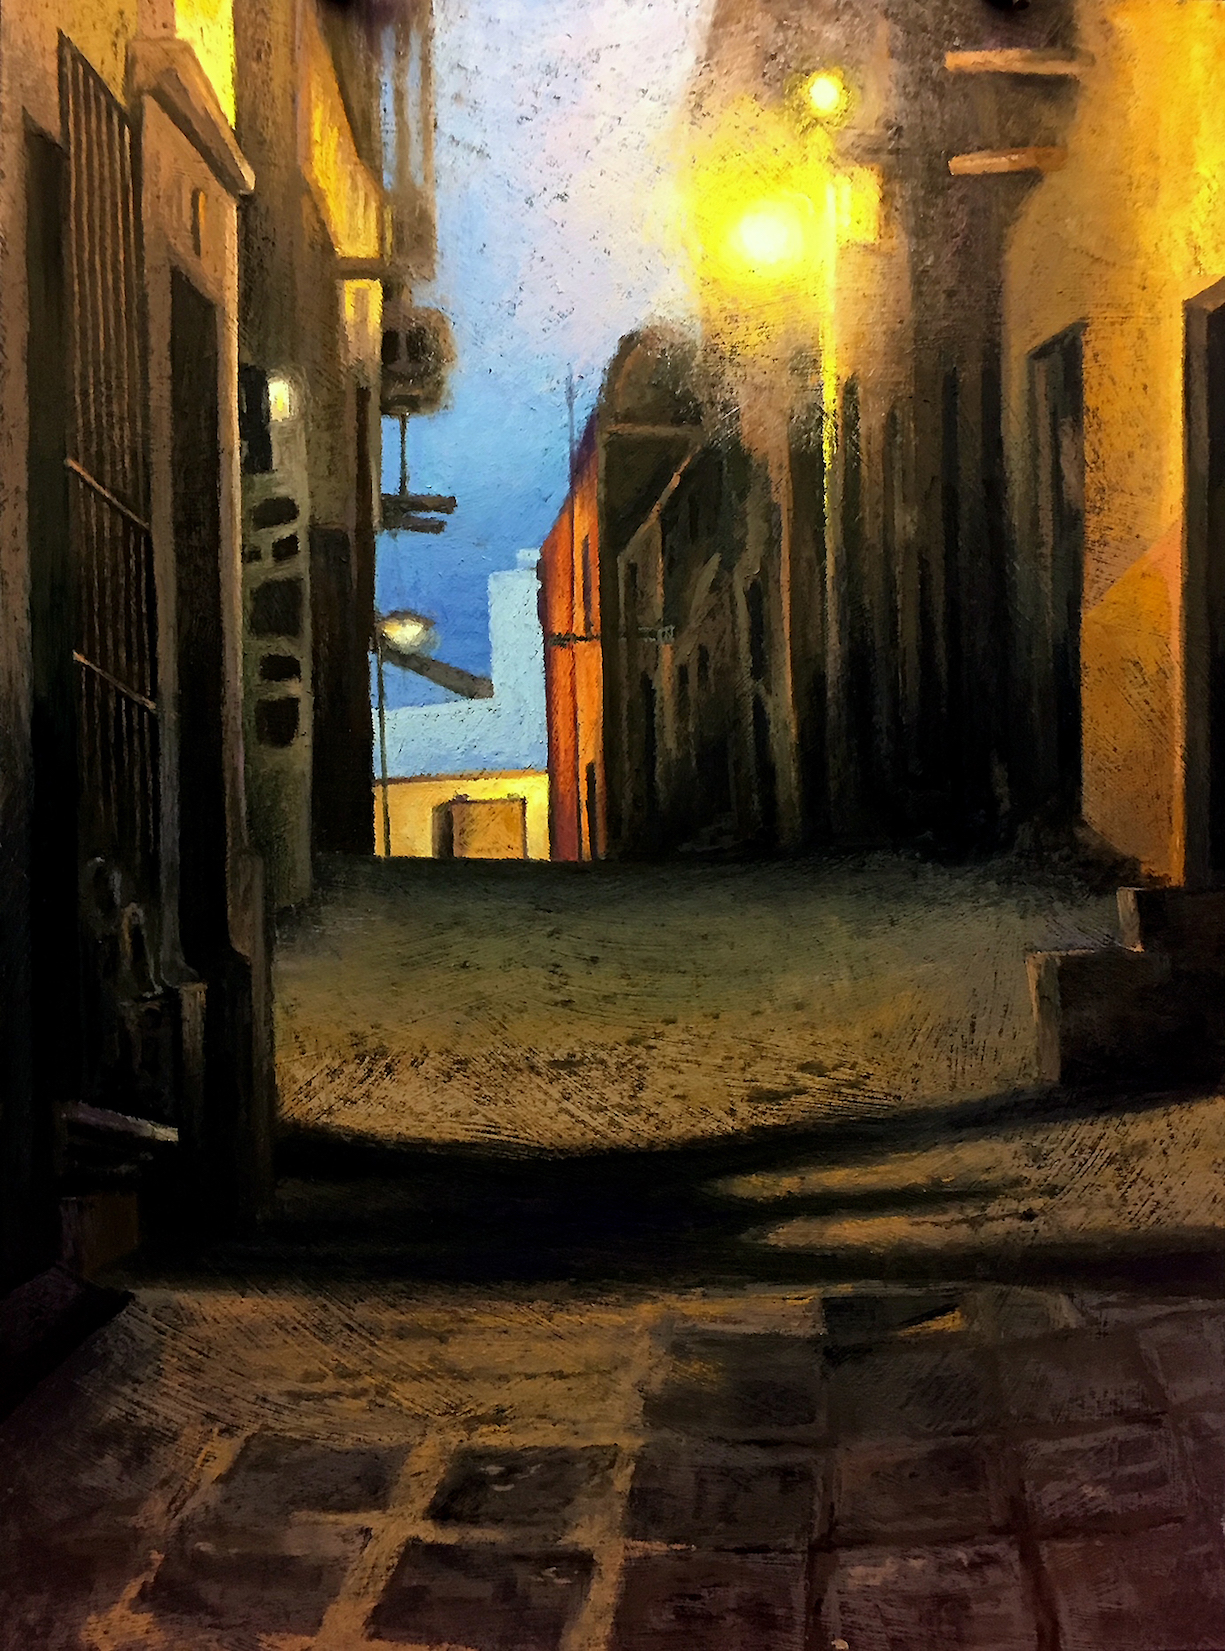 Chris Ivers, "Right Up My Alley," pastel on textured Gator Board, 24 x 18 in.